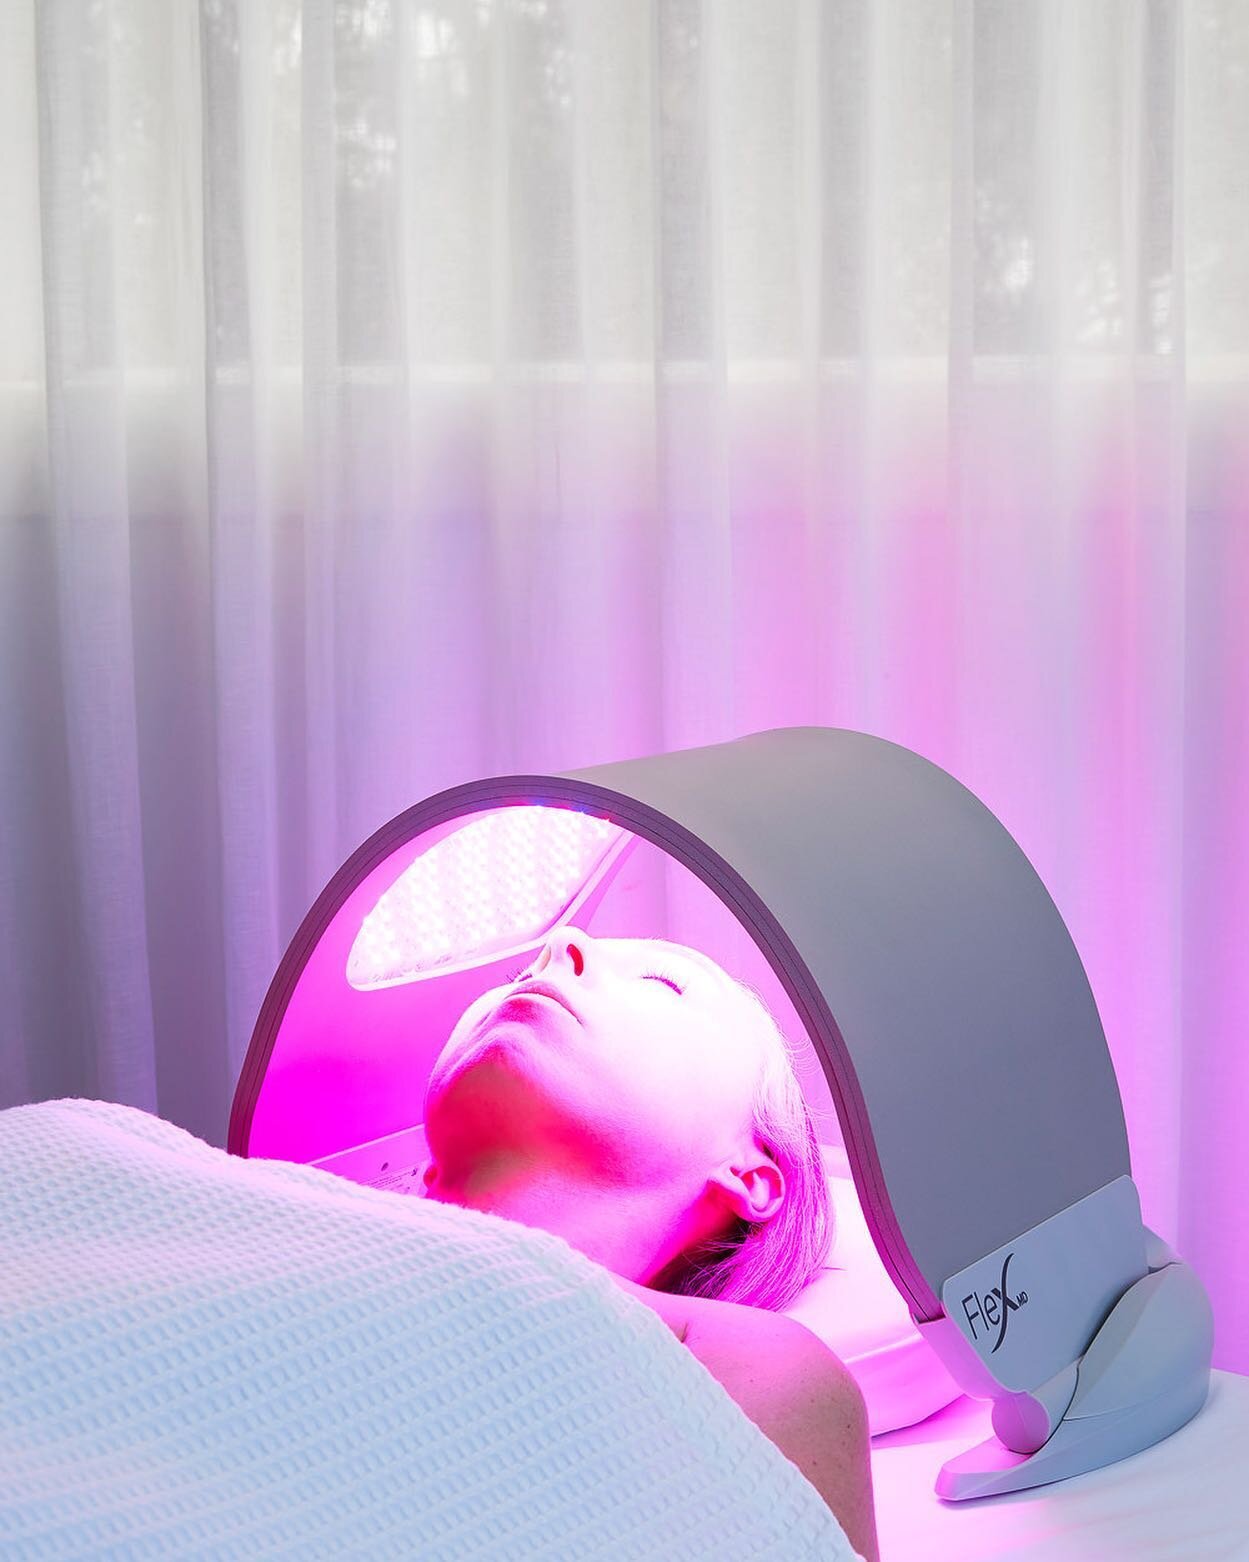 I&rsquo;m soo excited to welcome LED light therapy to Byron Spa Menu! ⚡️

I&rsquo;ve had this device on my wish list for years now and I&rsquo;m so happy to finally be offering this incredible therapy to my clients.

Multi-award-winning and medically